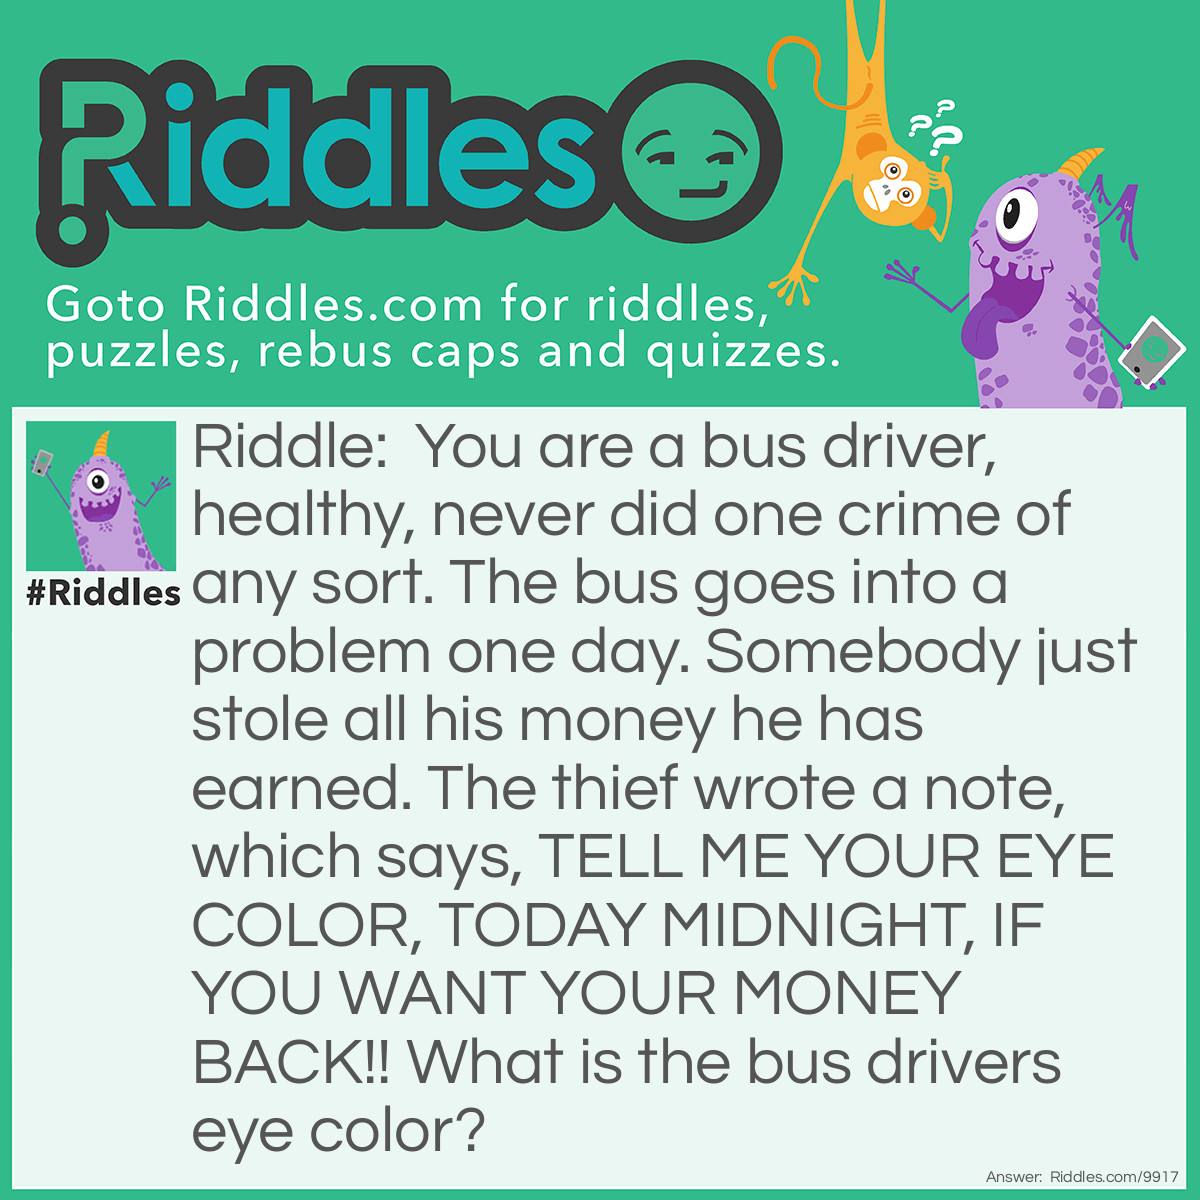 Riddle: You are a bus driver, healthy, never did one crime of any sort. The bus goes into a problem one day. Somebody just stole all his money he has earned. The thief wrote a note, which says, TELL ME YOUR EYE COLOR, TODAY MIDNIGHT, IF YOU WANT YOUR MONEY BACK!! What is the bus drivers eye color? Answer: I don't know. I said YOU are a bus driver. What's your eye color?